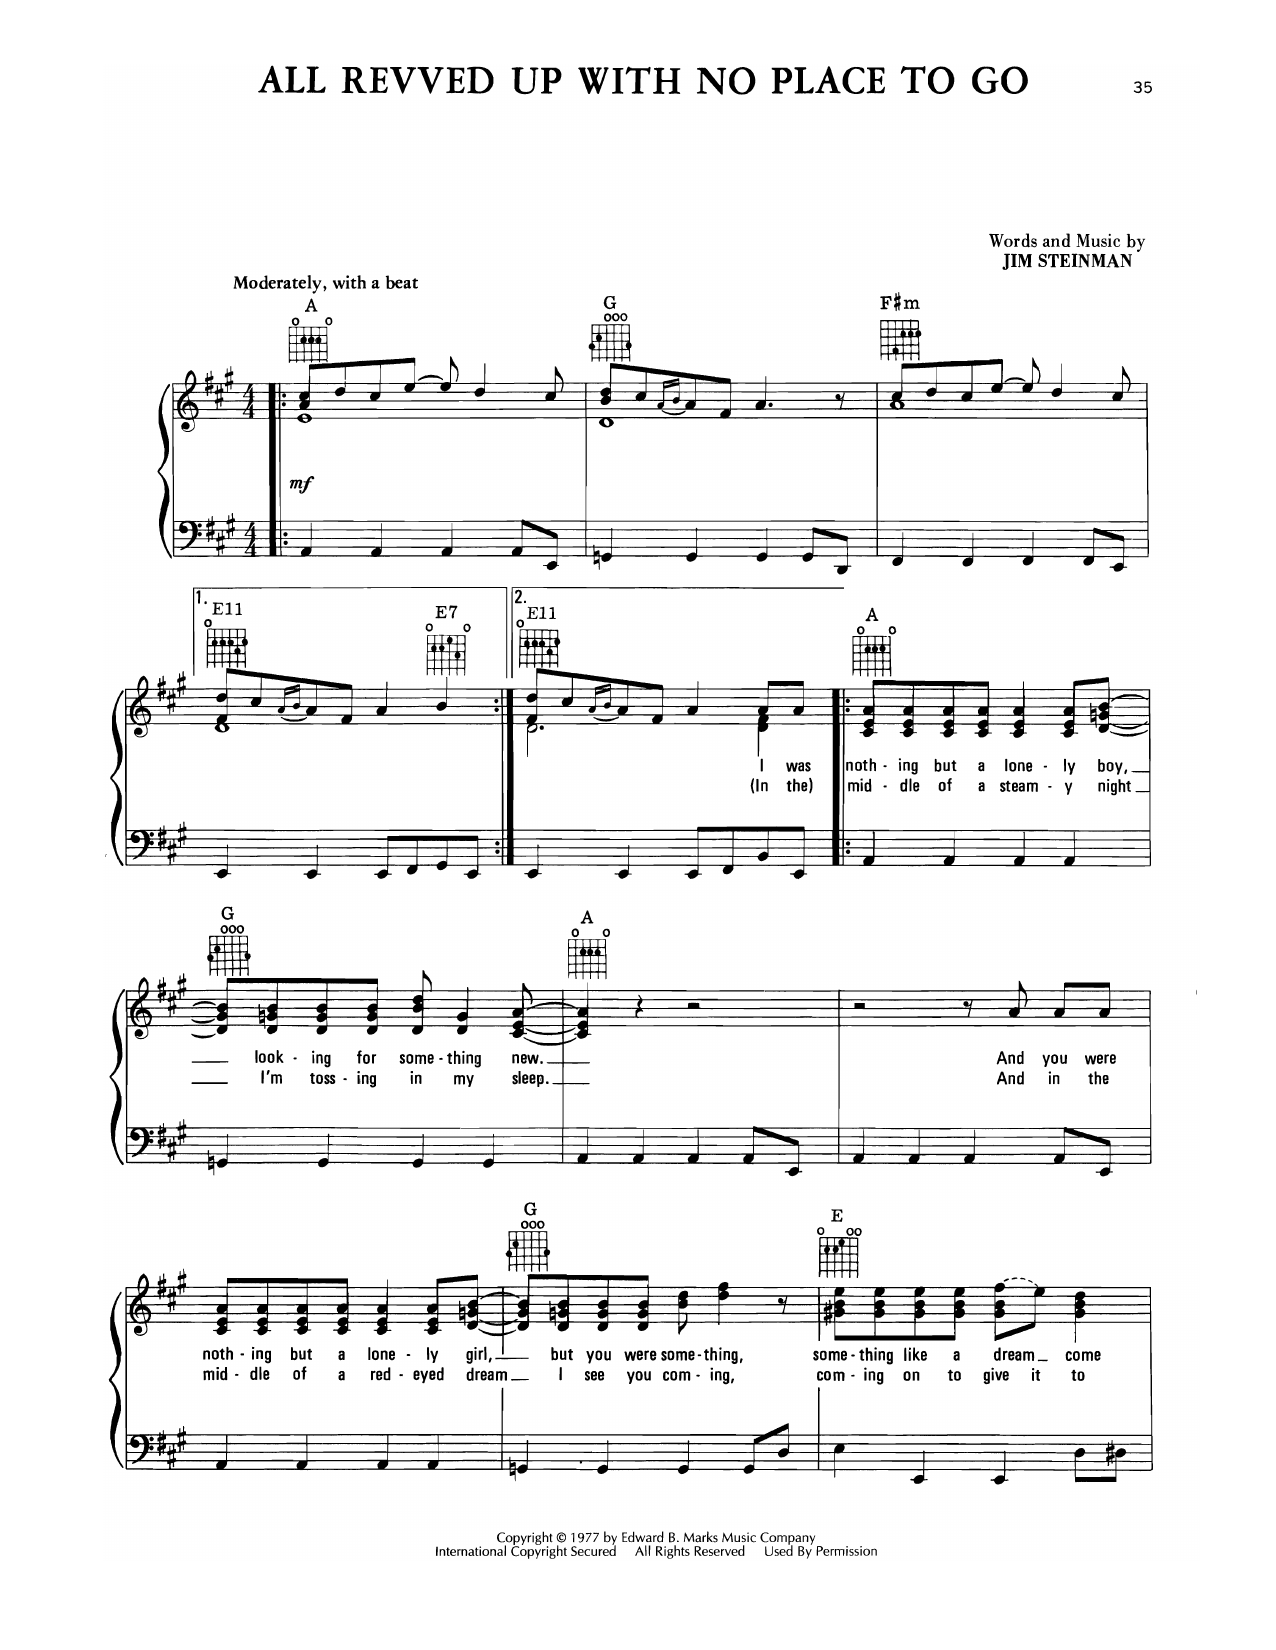 Download Meat Loaf All Revved Up With No Place To Go Sheet Music